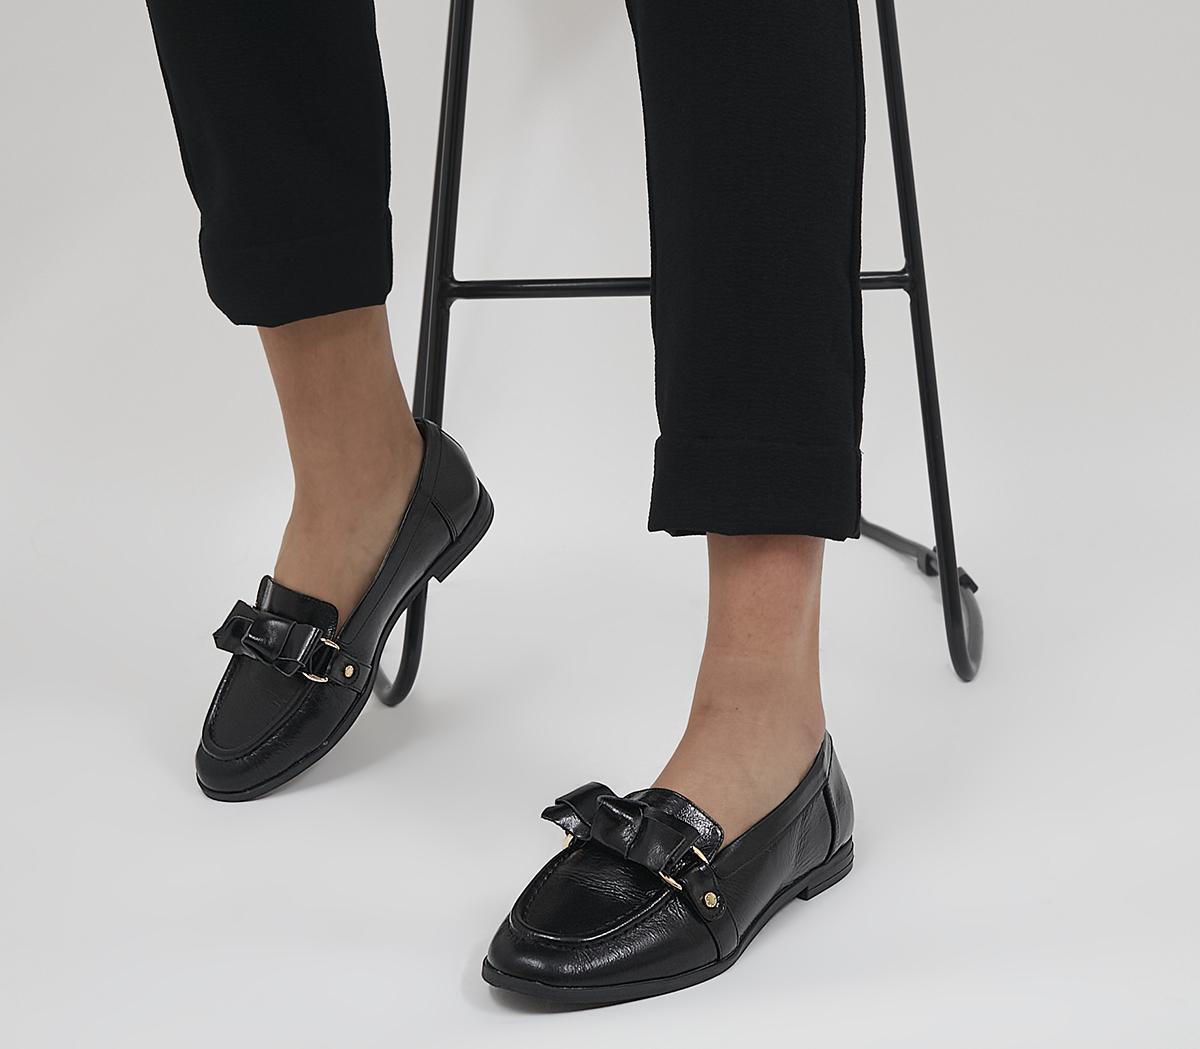 OFFICEFlawless Soft Bow LoafersBlack Leather